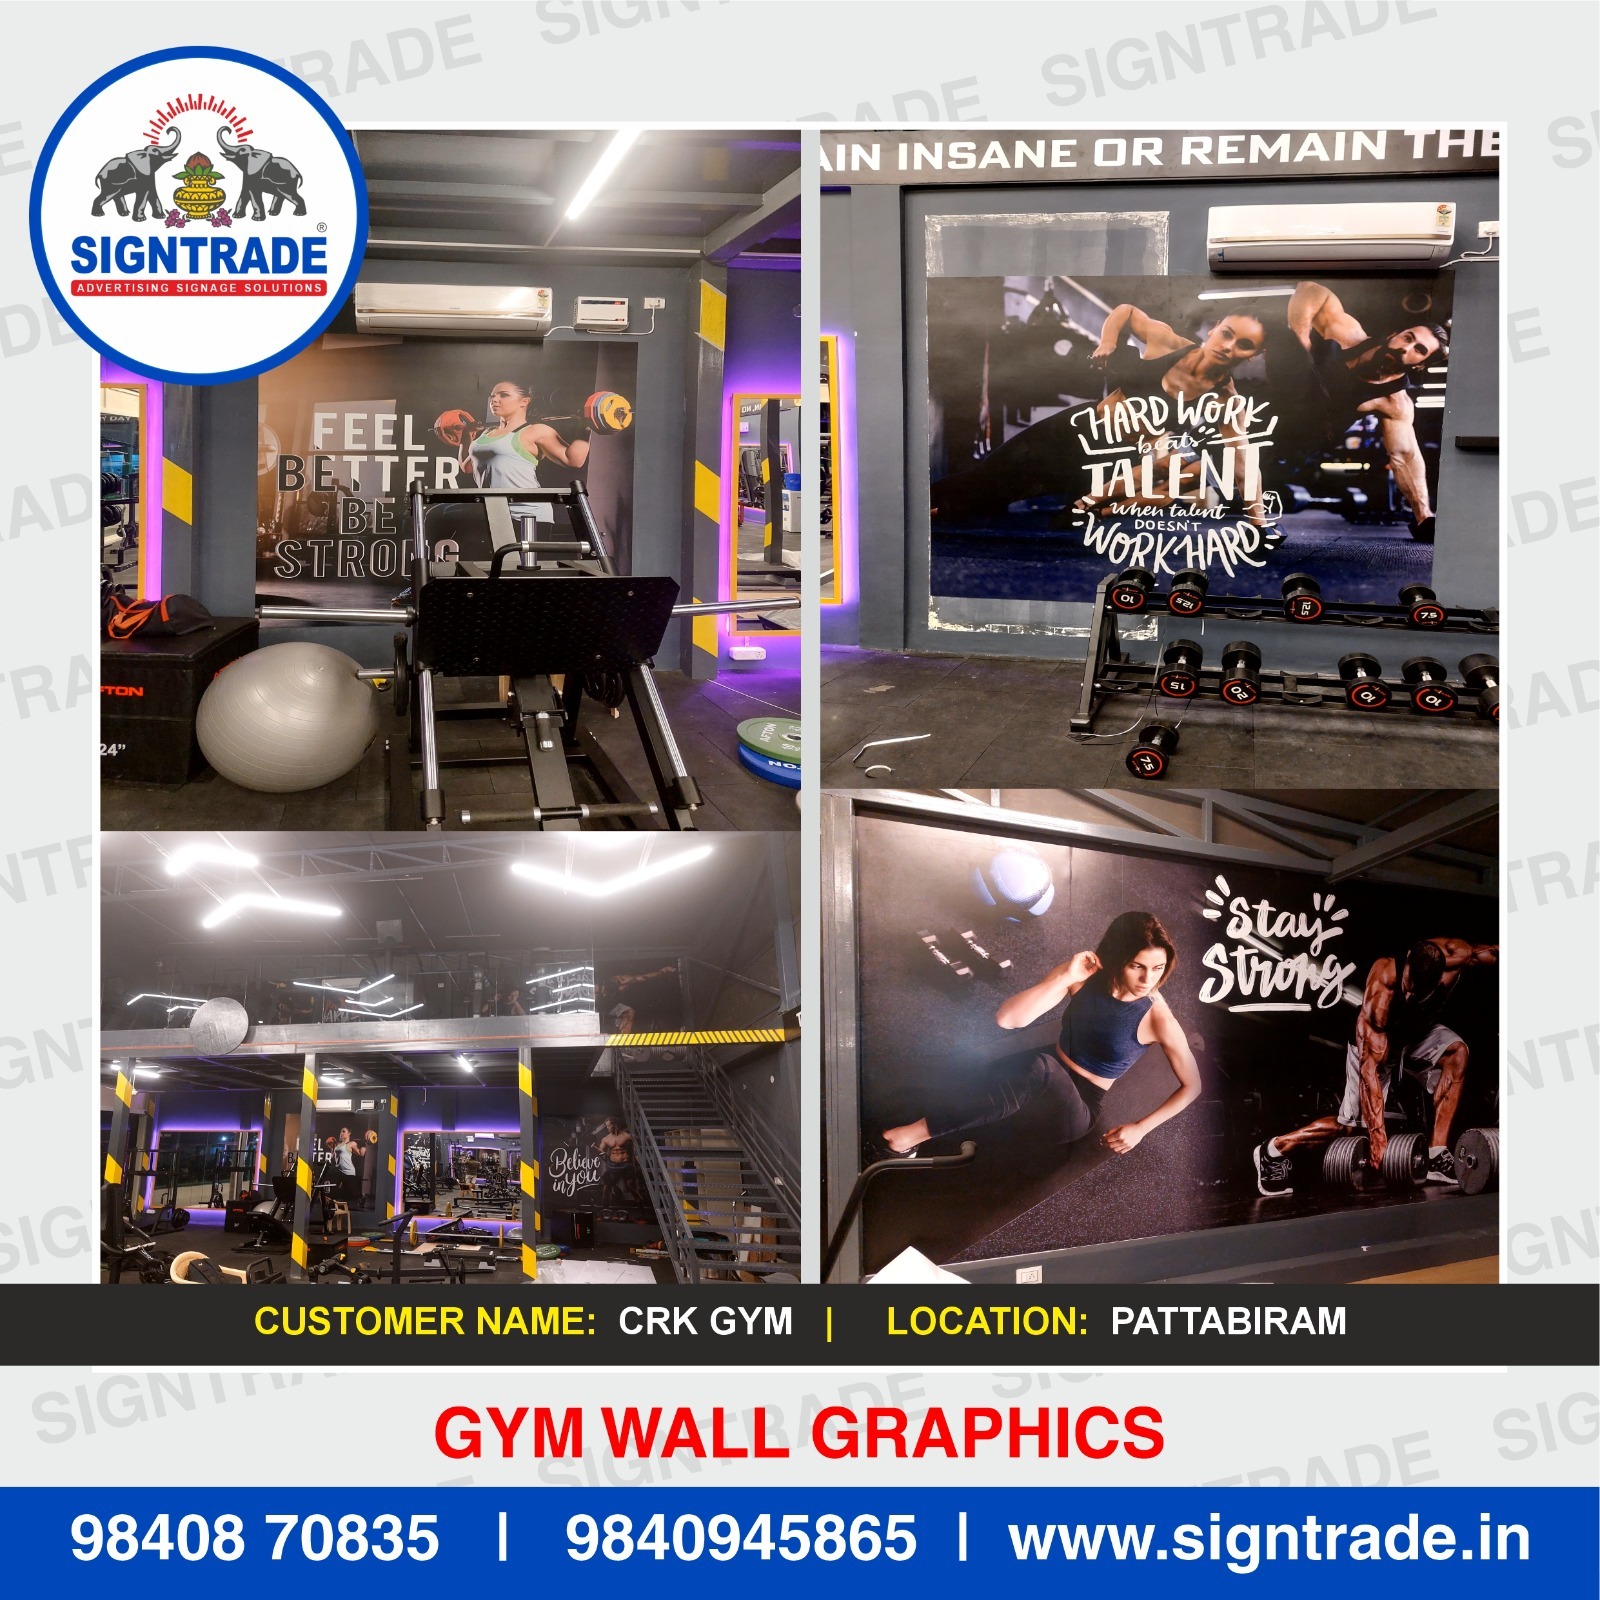 Gym Wall Stickers near me in Guindy Chennai